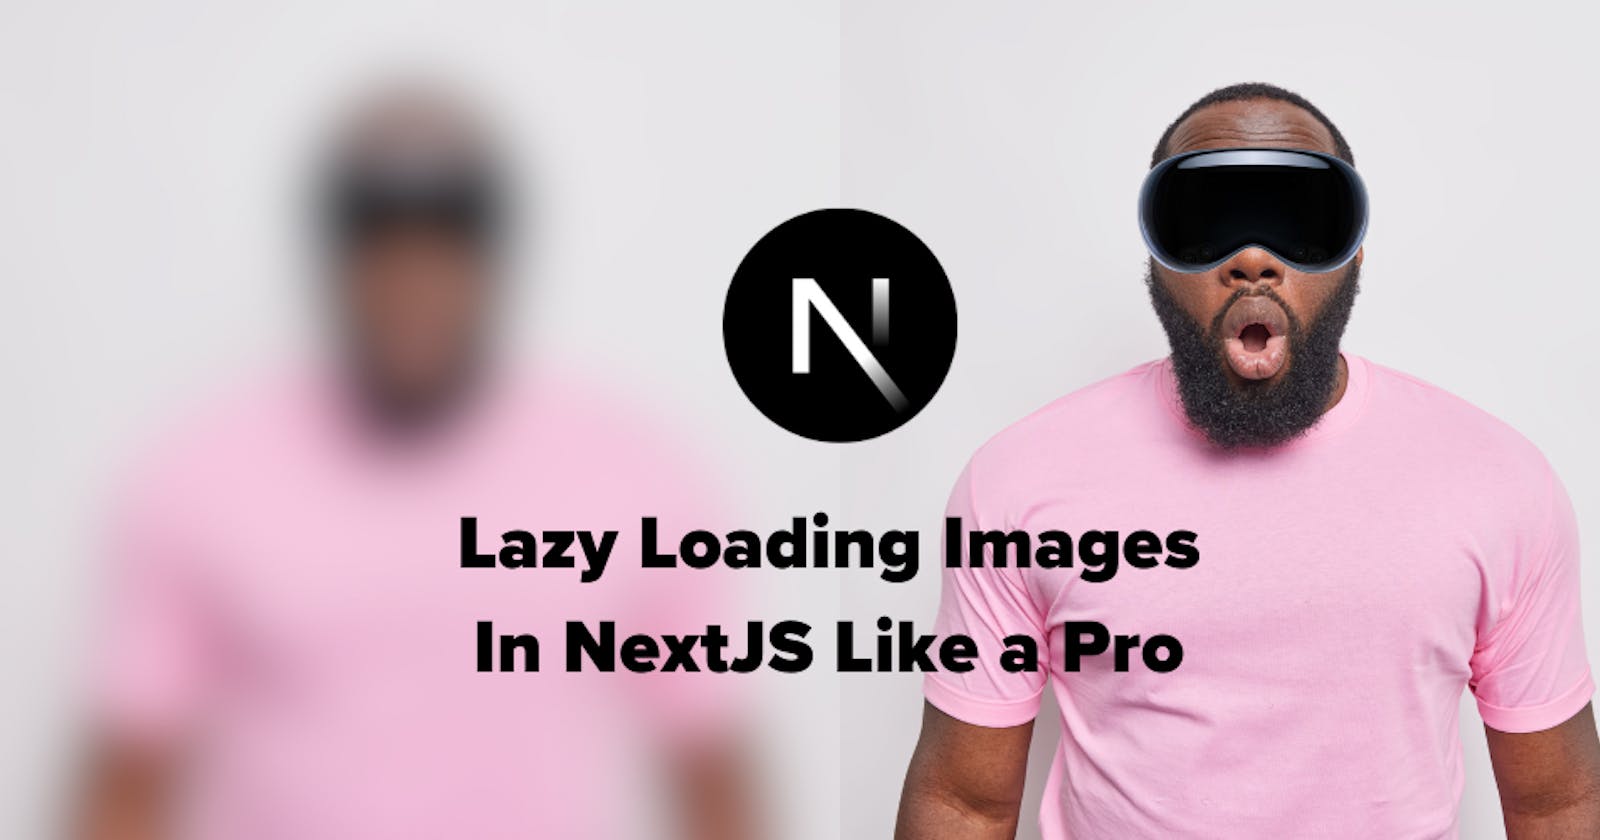 Lazy Loading Images Like a Pro in Next.js